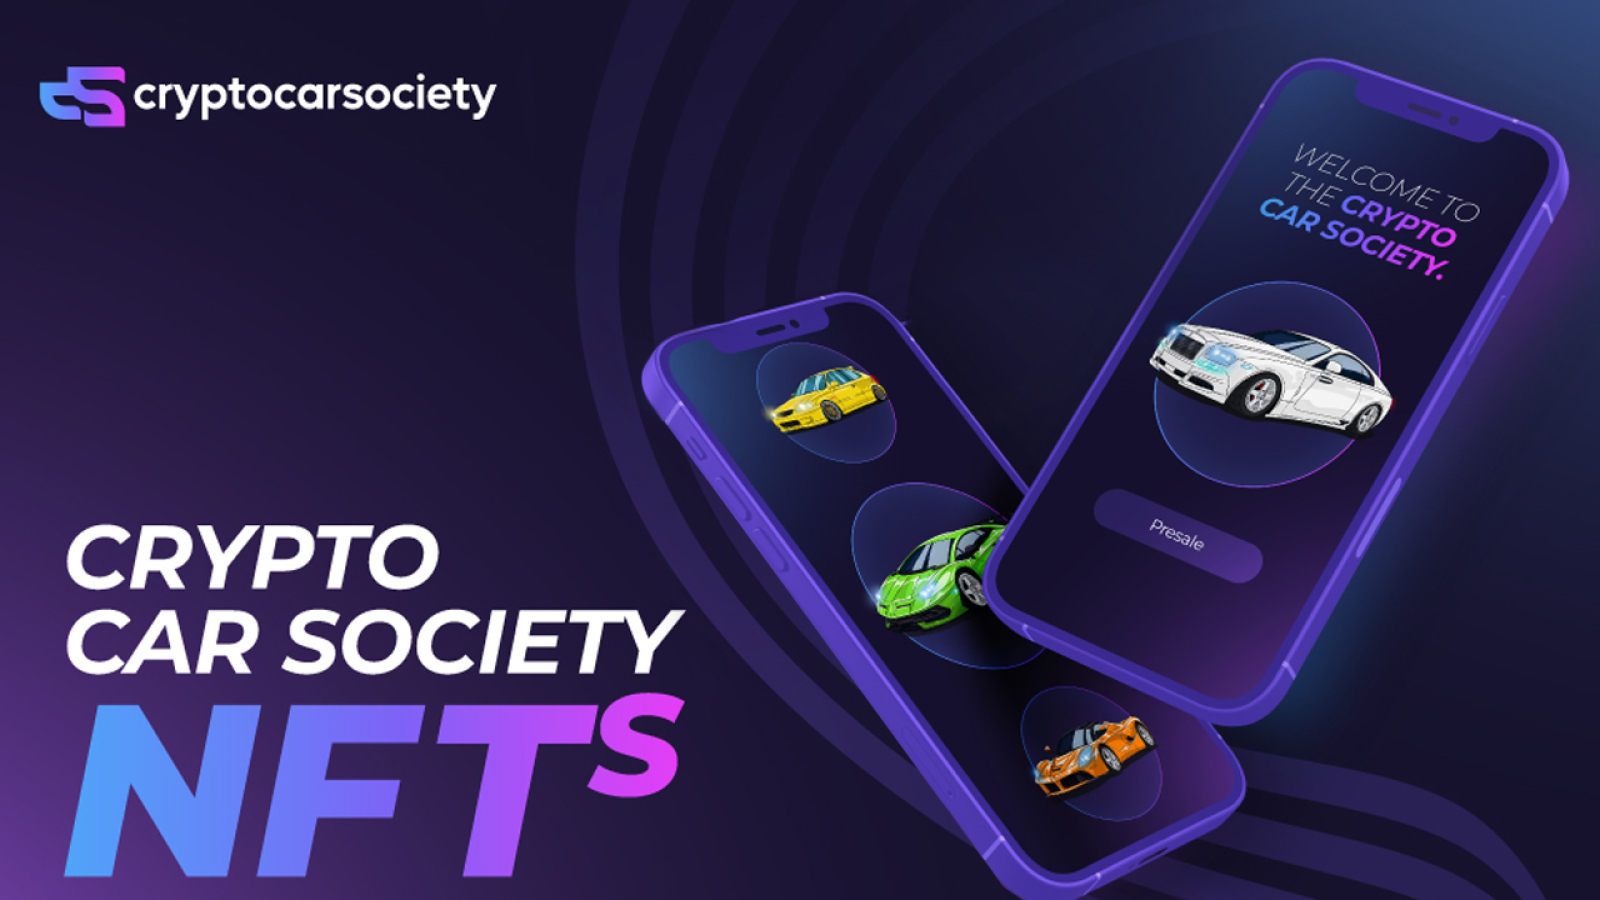 The Crypto Car Society to Launch an Innovative NFT Collection